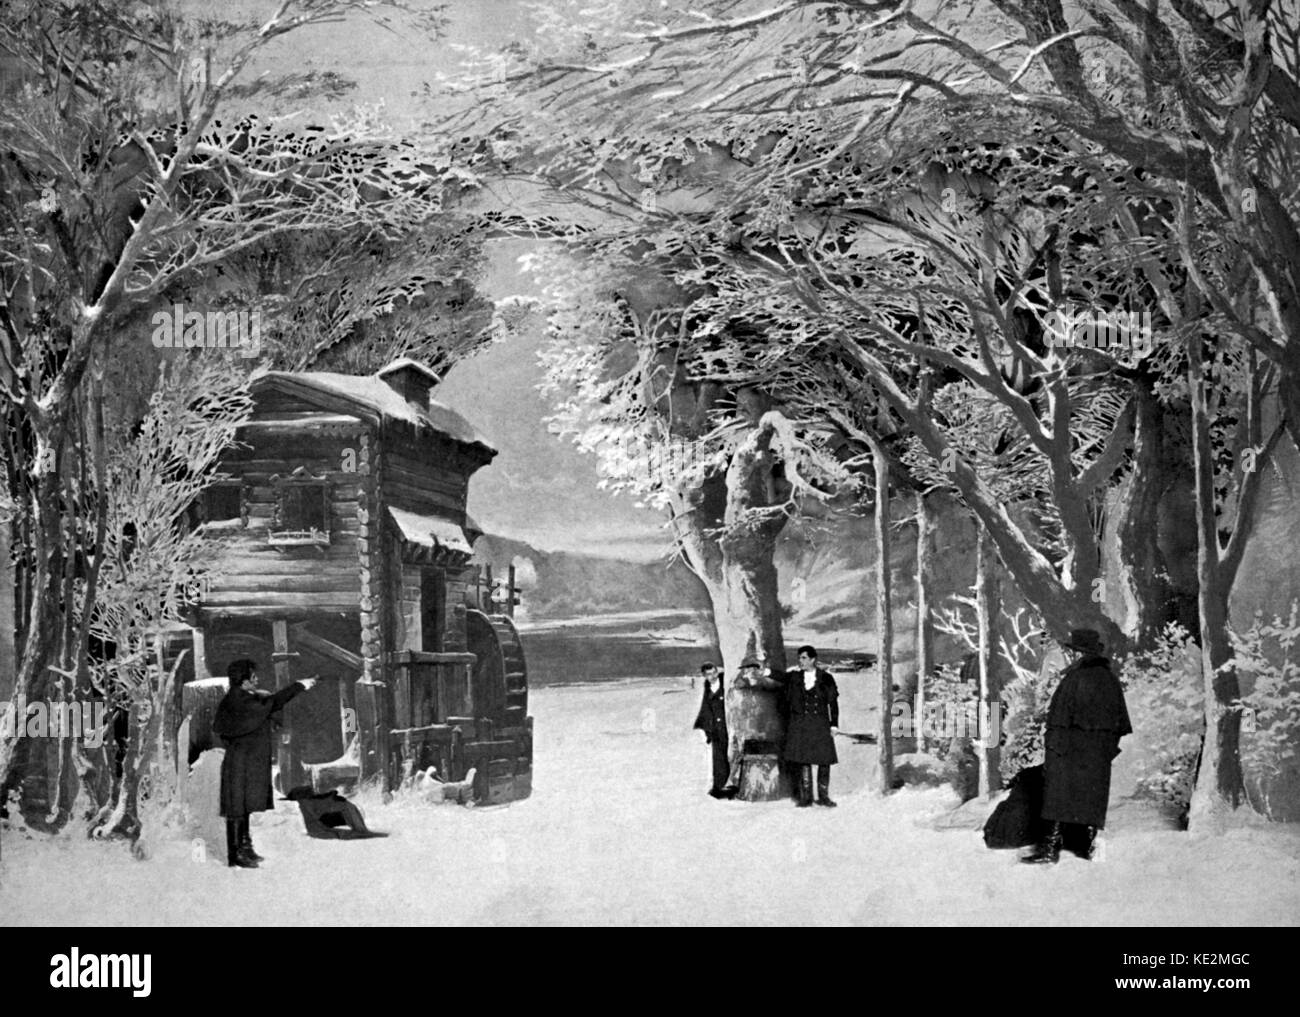 Duel scene from Russian composer Tchaikovsky 's ' Eugene Onegin ' at the Theater des Westens in Berlin. Taken from the journal 'Bühne und Welt', special edition. 7 May 1840 - 6 November 1893. Stock Photo